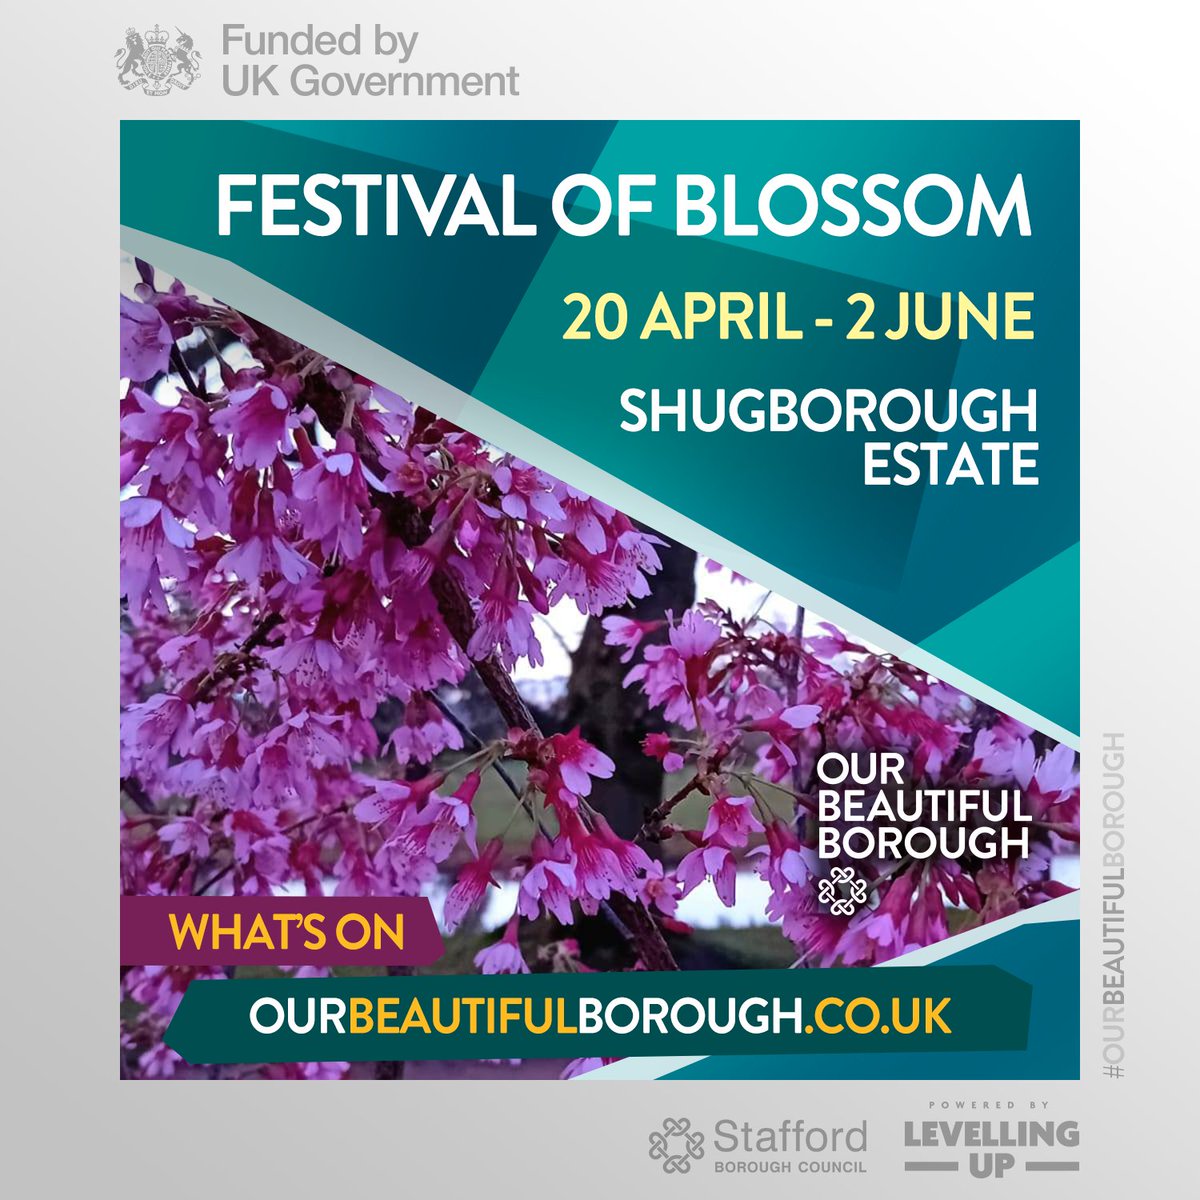 Celebrate the blossom season at @shugboroughNT with a series of events and activities running from 20th April to 2nd June. For details on the Poetry Gallery, Poet in Residence and Poetry Walk visit: tinyurl.com/3m7jps62 #DaysOut #FamilyFun #OurBeautifulBorough @djversified